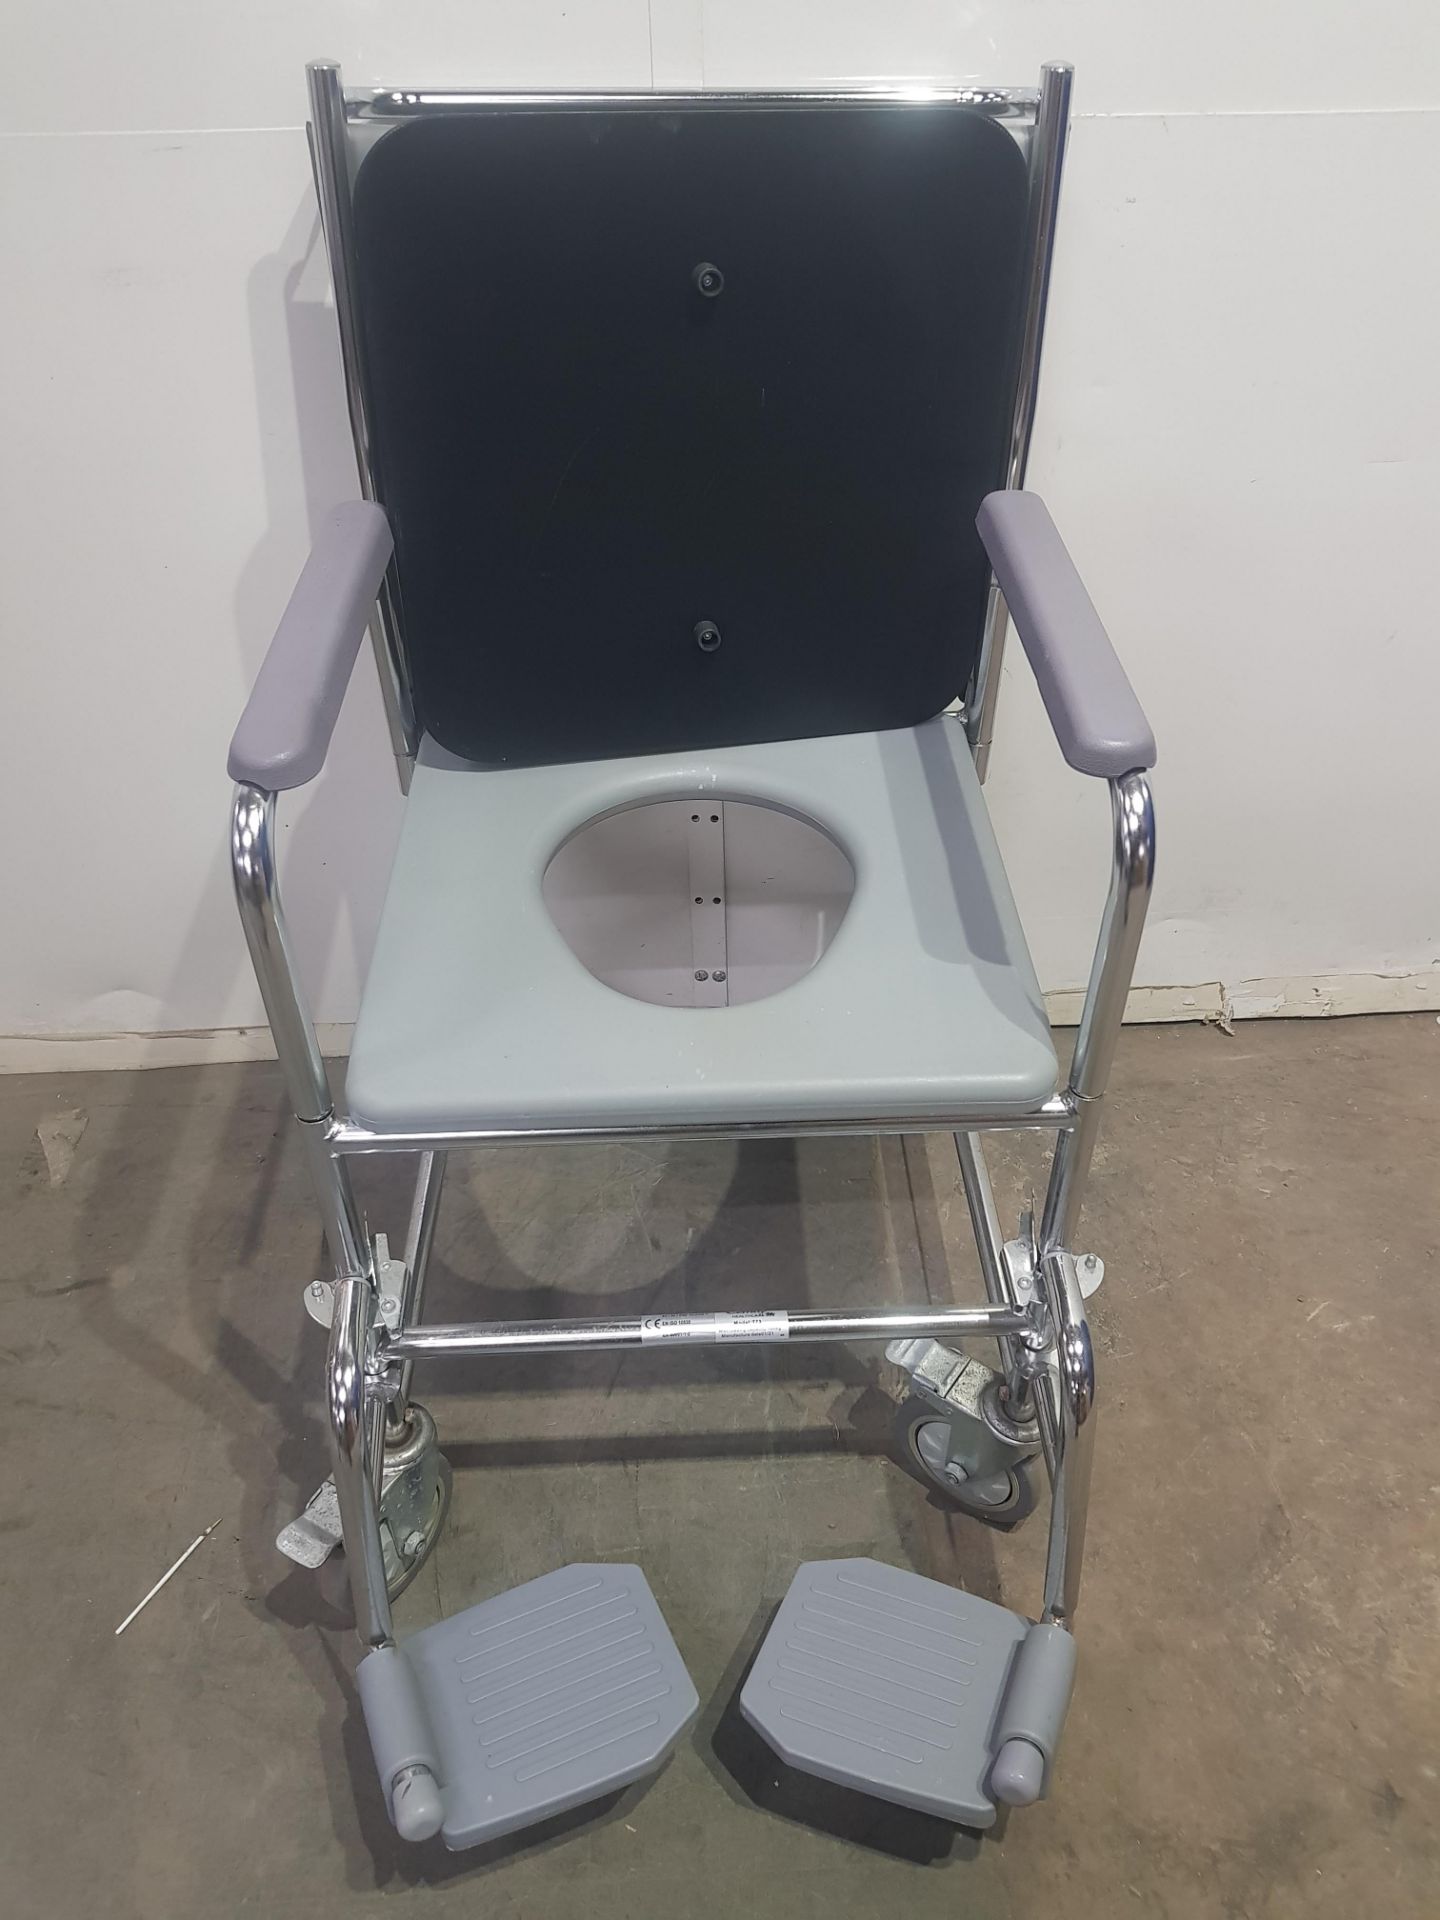 Cefindy Toilet Chair, Height Adjustable - Image 2 of 4